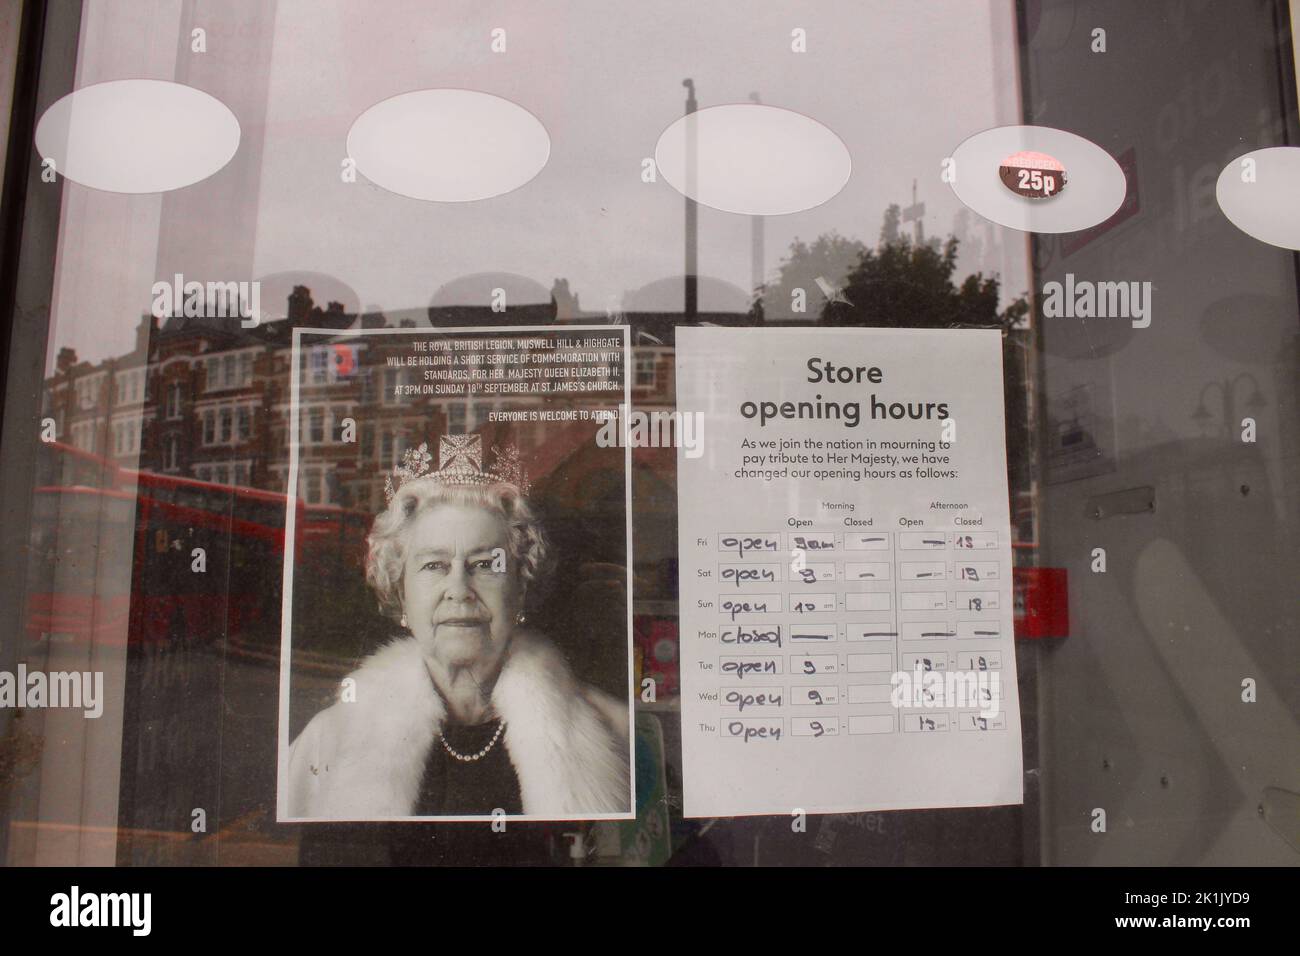 shop window displays and closed signs in muswell hill on 19th september 2022 for the Queen Elizabeth 2 funeral tribute and commemoration Stock Photo